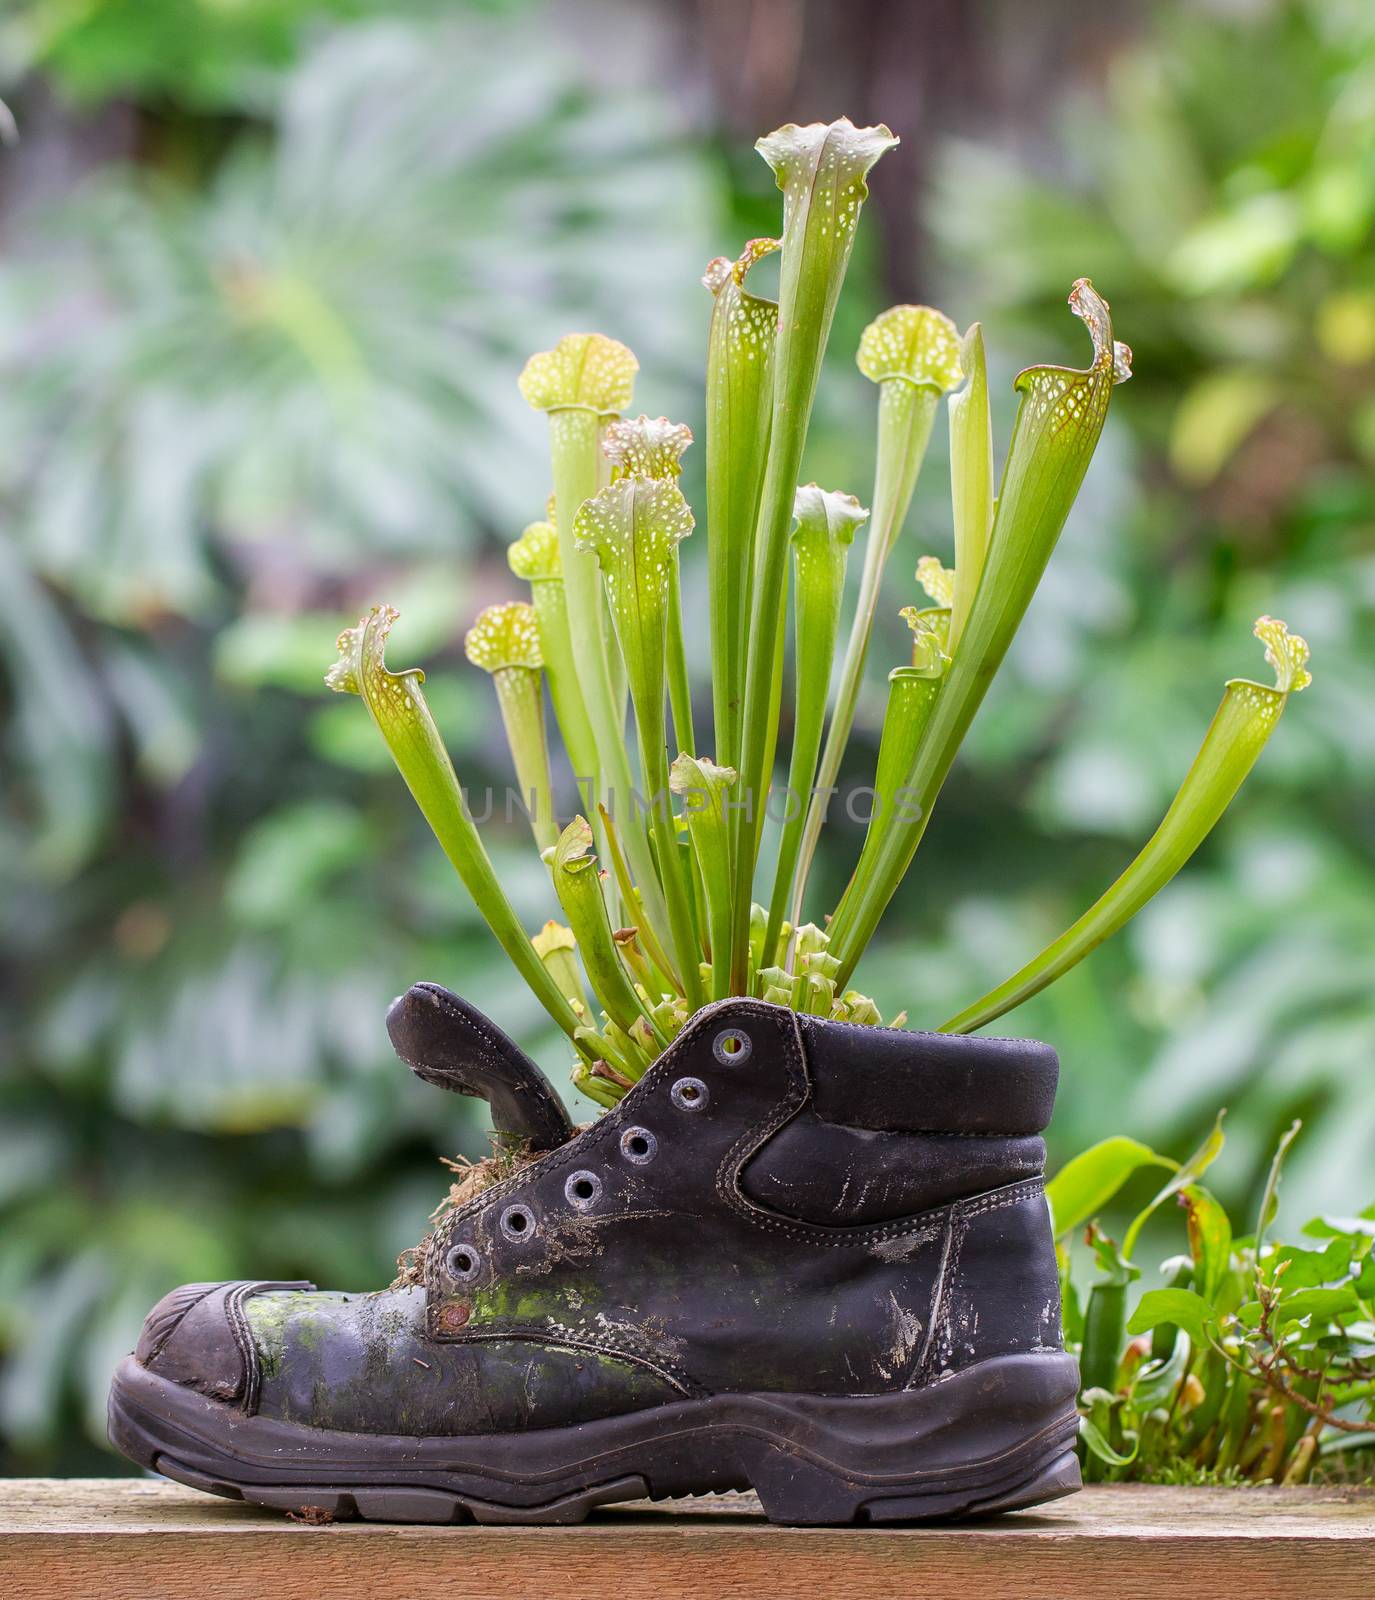 Pitcher plants in an old shoe by michaklootwijk